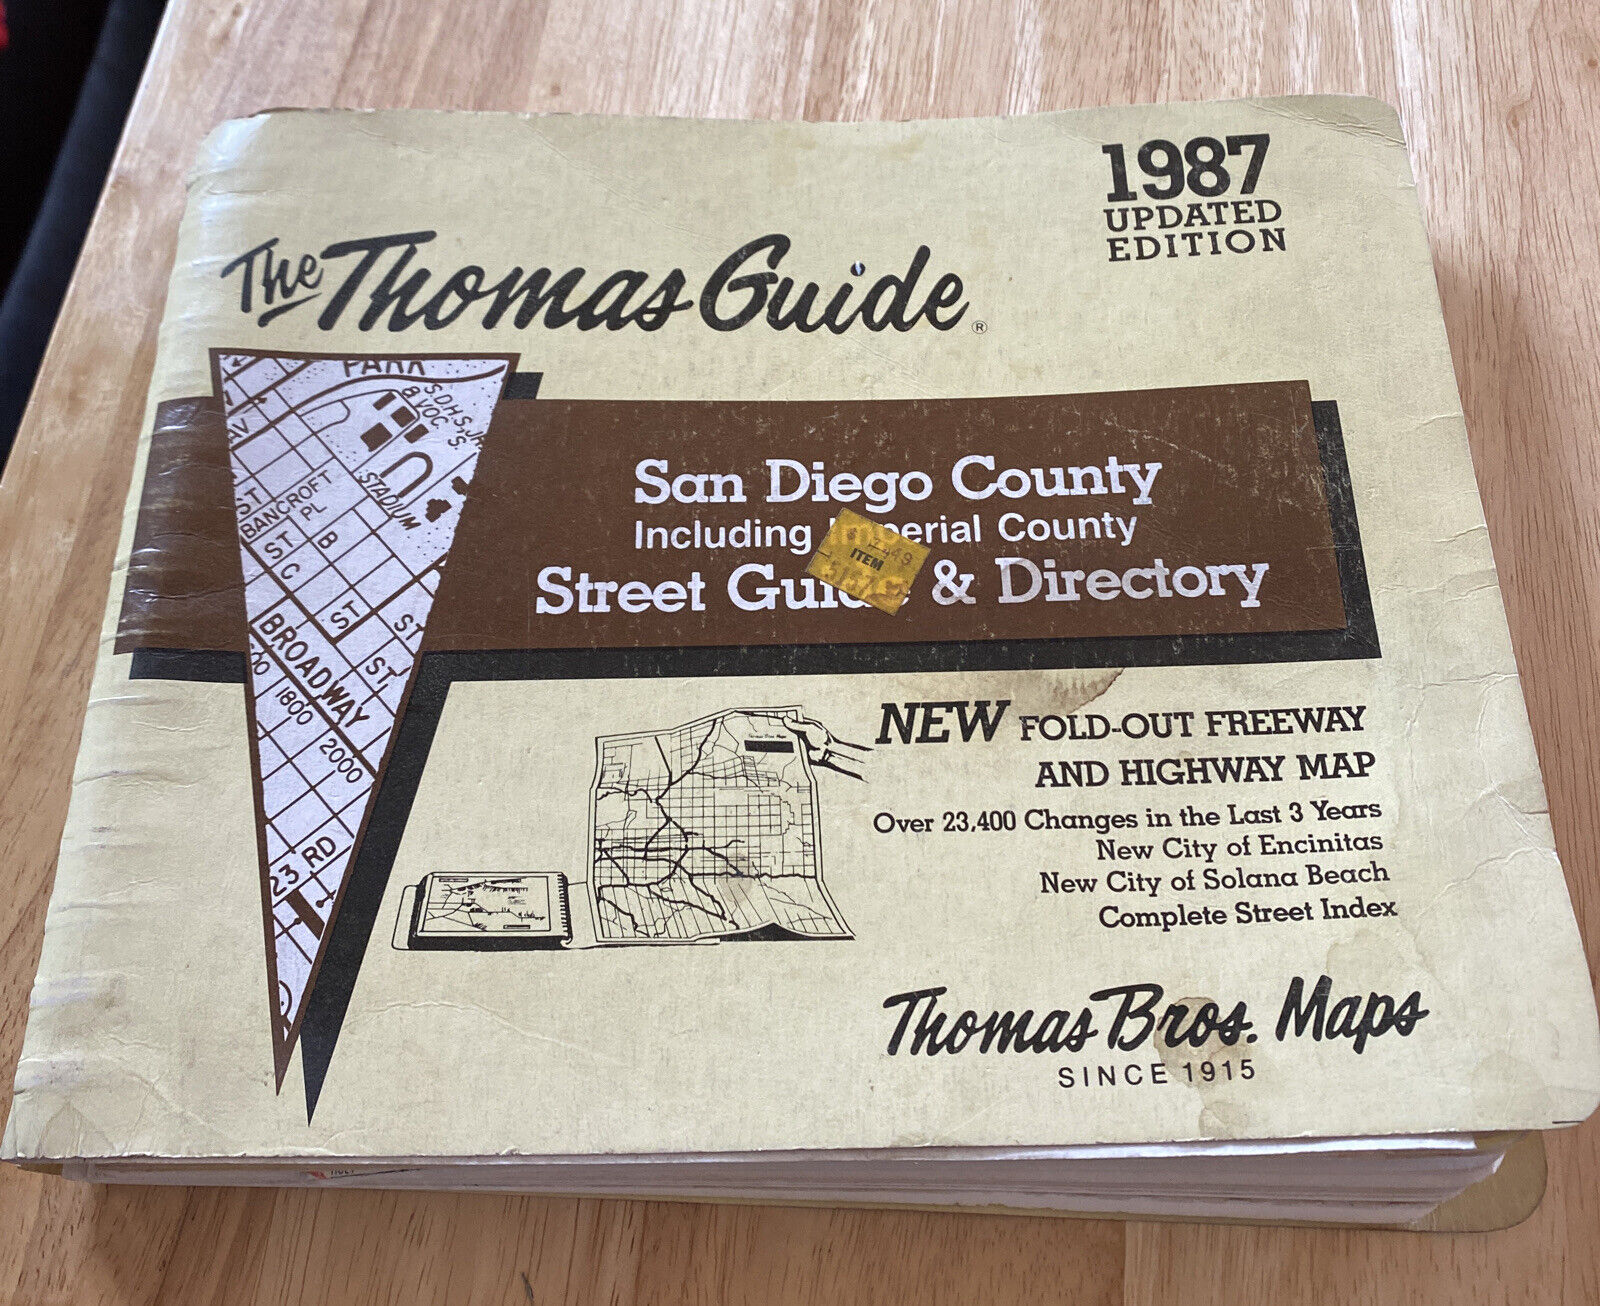 1987 Thomas Guide for the city of San DIego